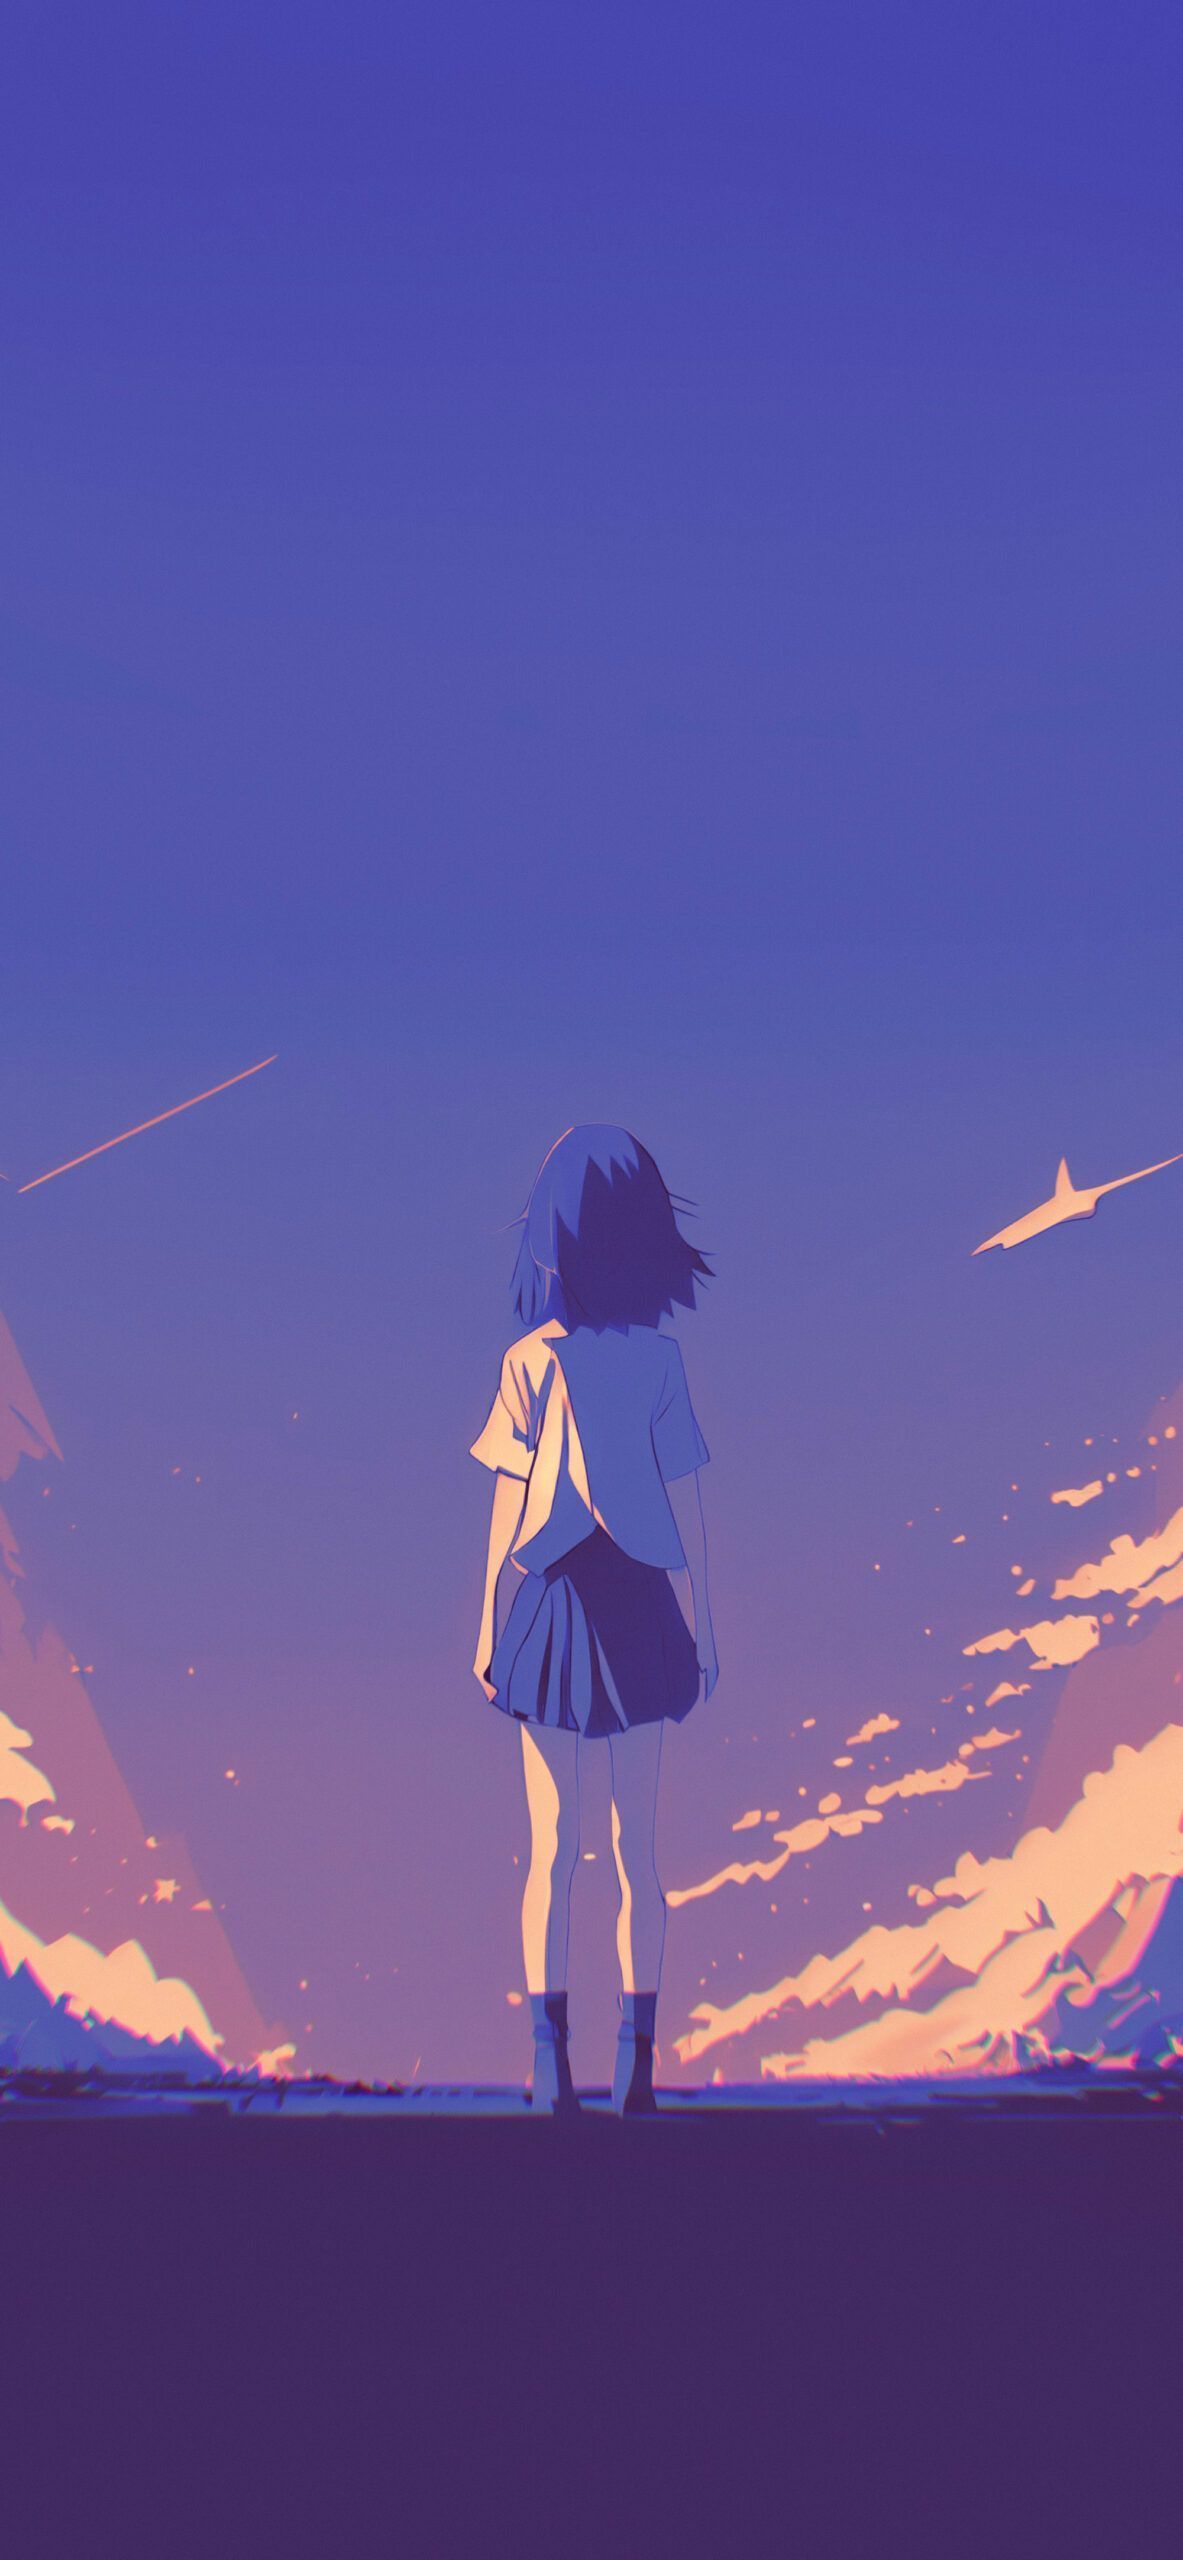 A girl standing in front of the sky - Blue anime, sky, anime girl, anime